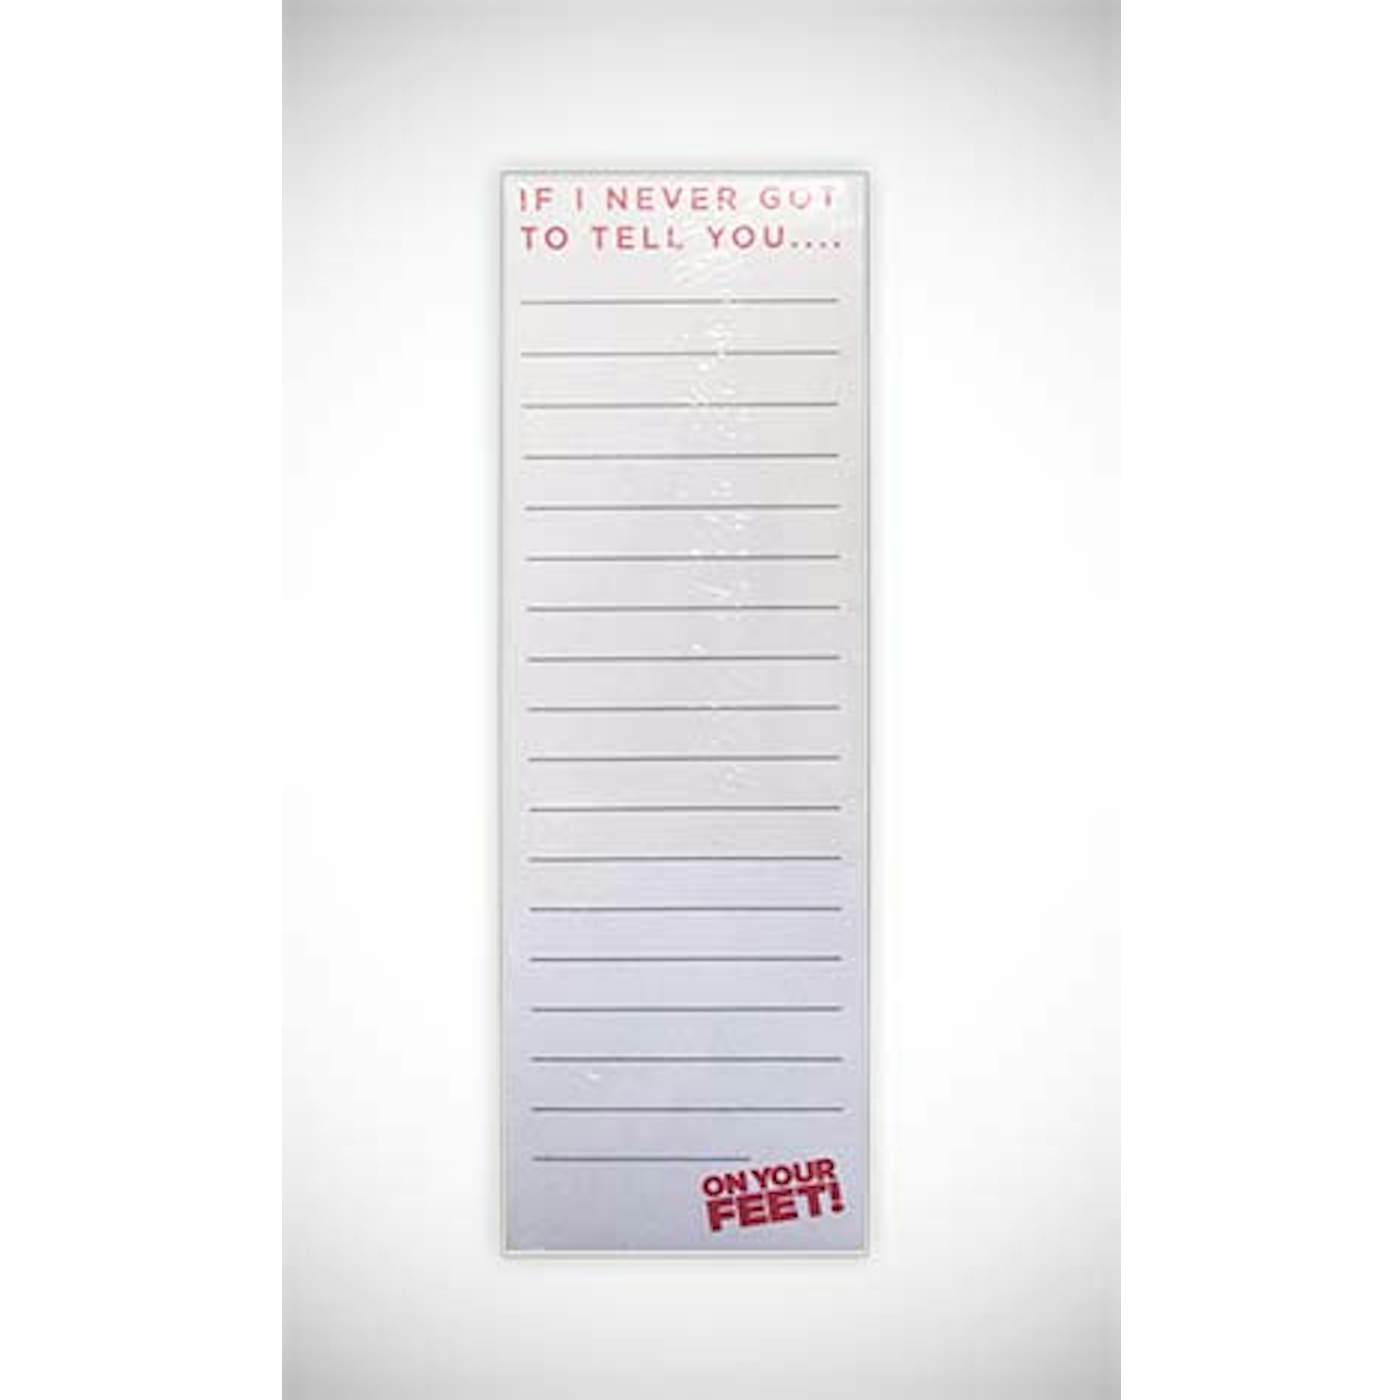 ON YOUR FEET: THE STORY OF EMILIO & GLORIA On Your Feet Notepad